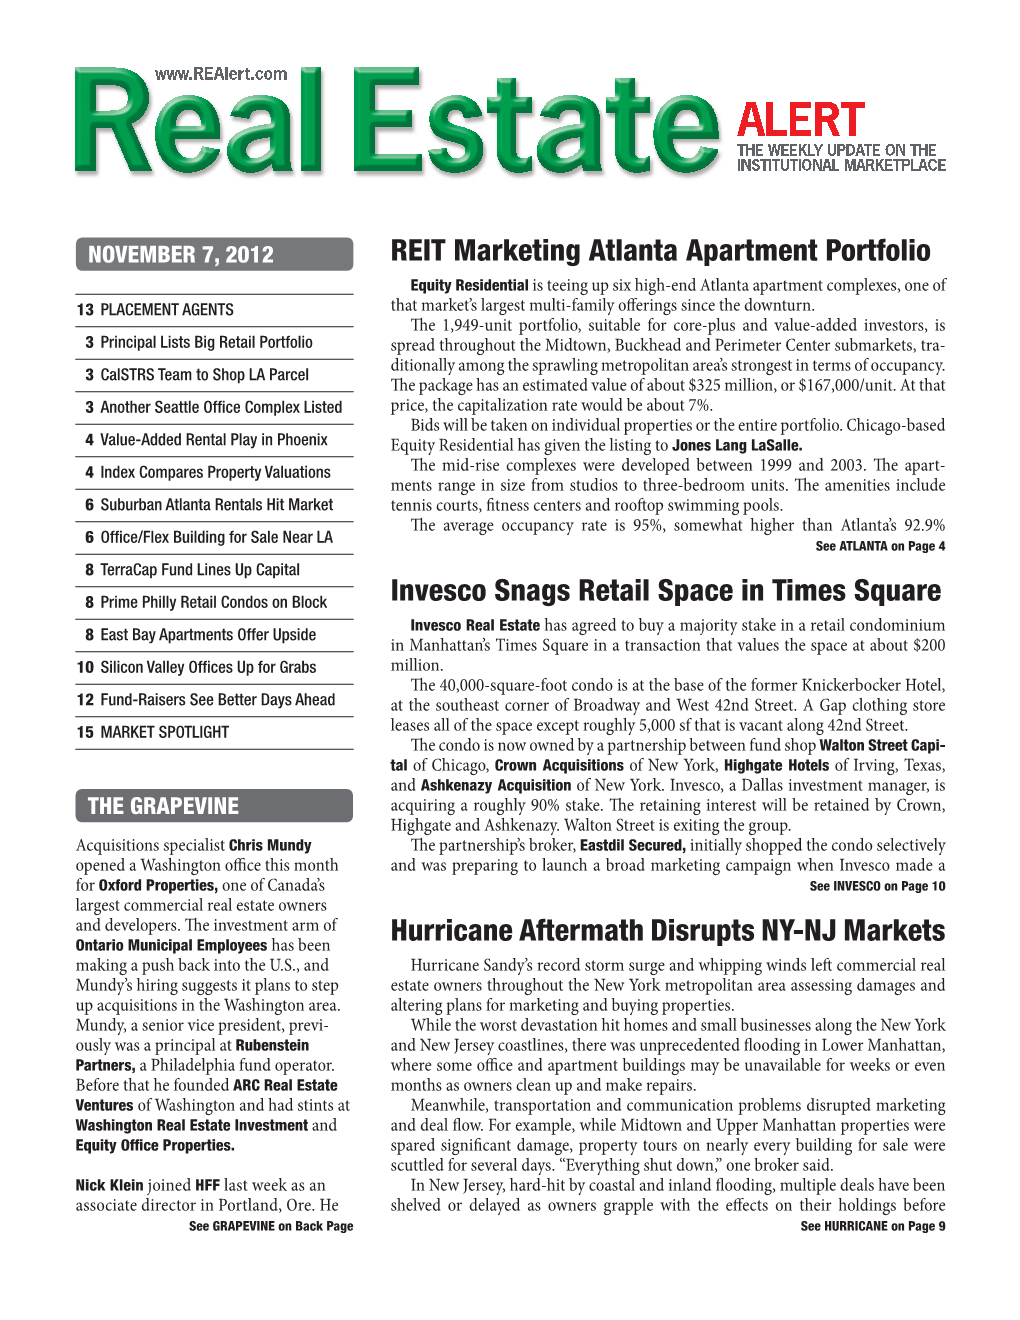 Real Estate Alert, the Weekly Newsletter That Gives You the Freshest Intelligence on the Confidential Plans of Leading Dealmakers